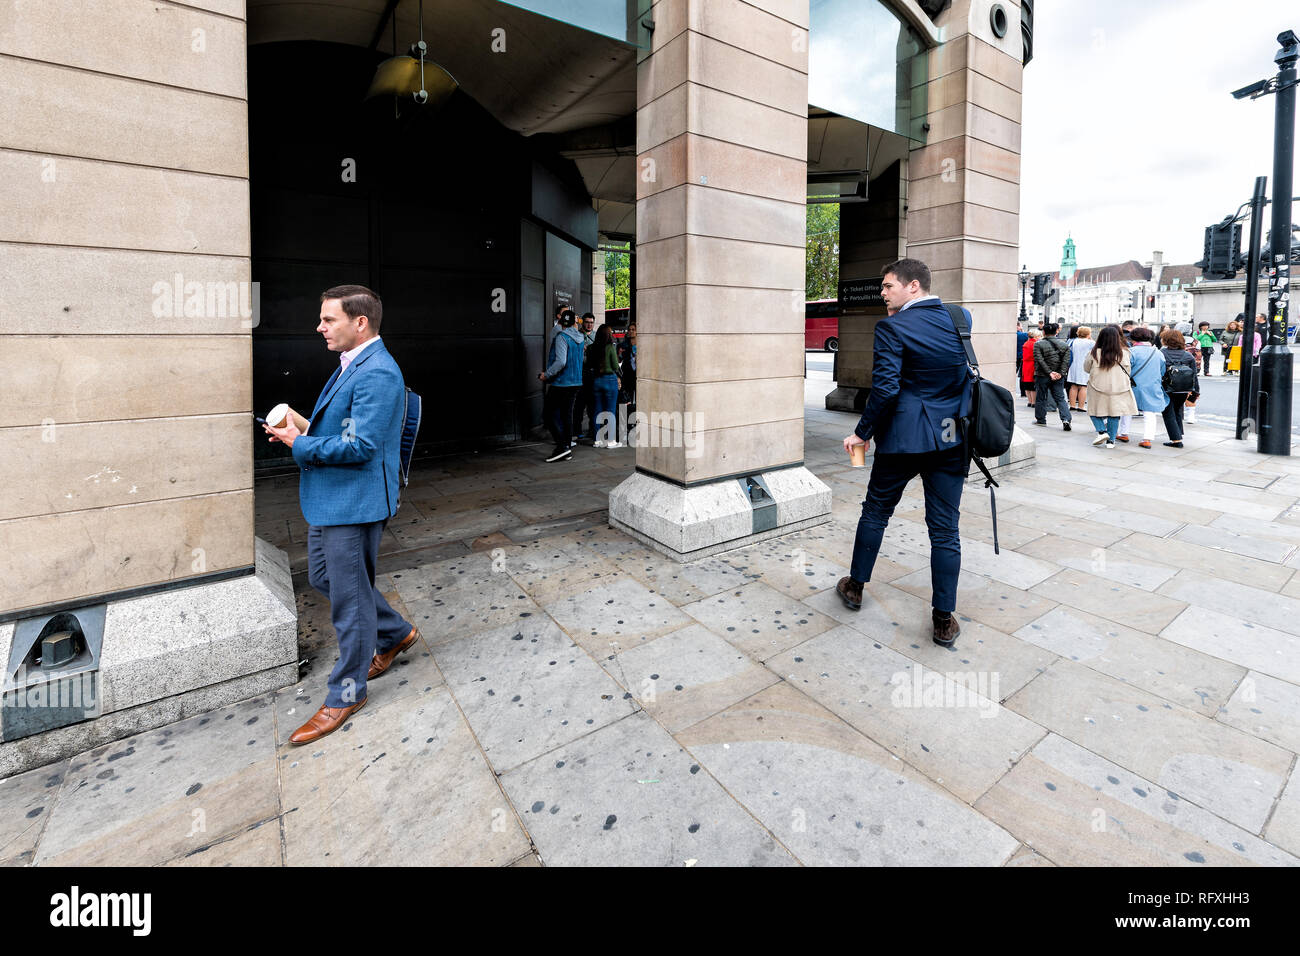 London, UK - September 12, 2018: People walking pedestrians with coffee by Victoria Embankment Thames River and building Stock Photo